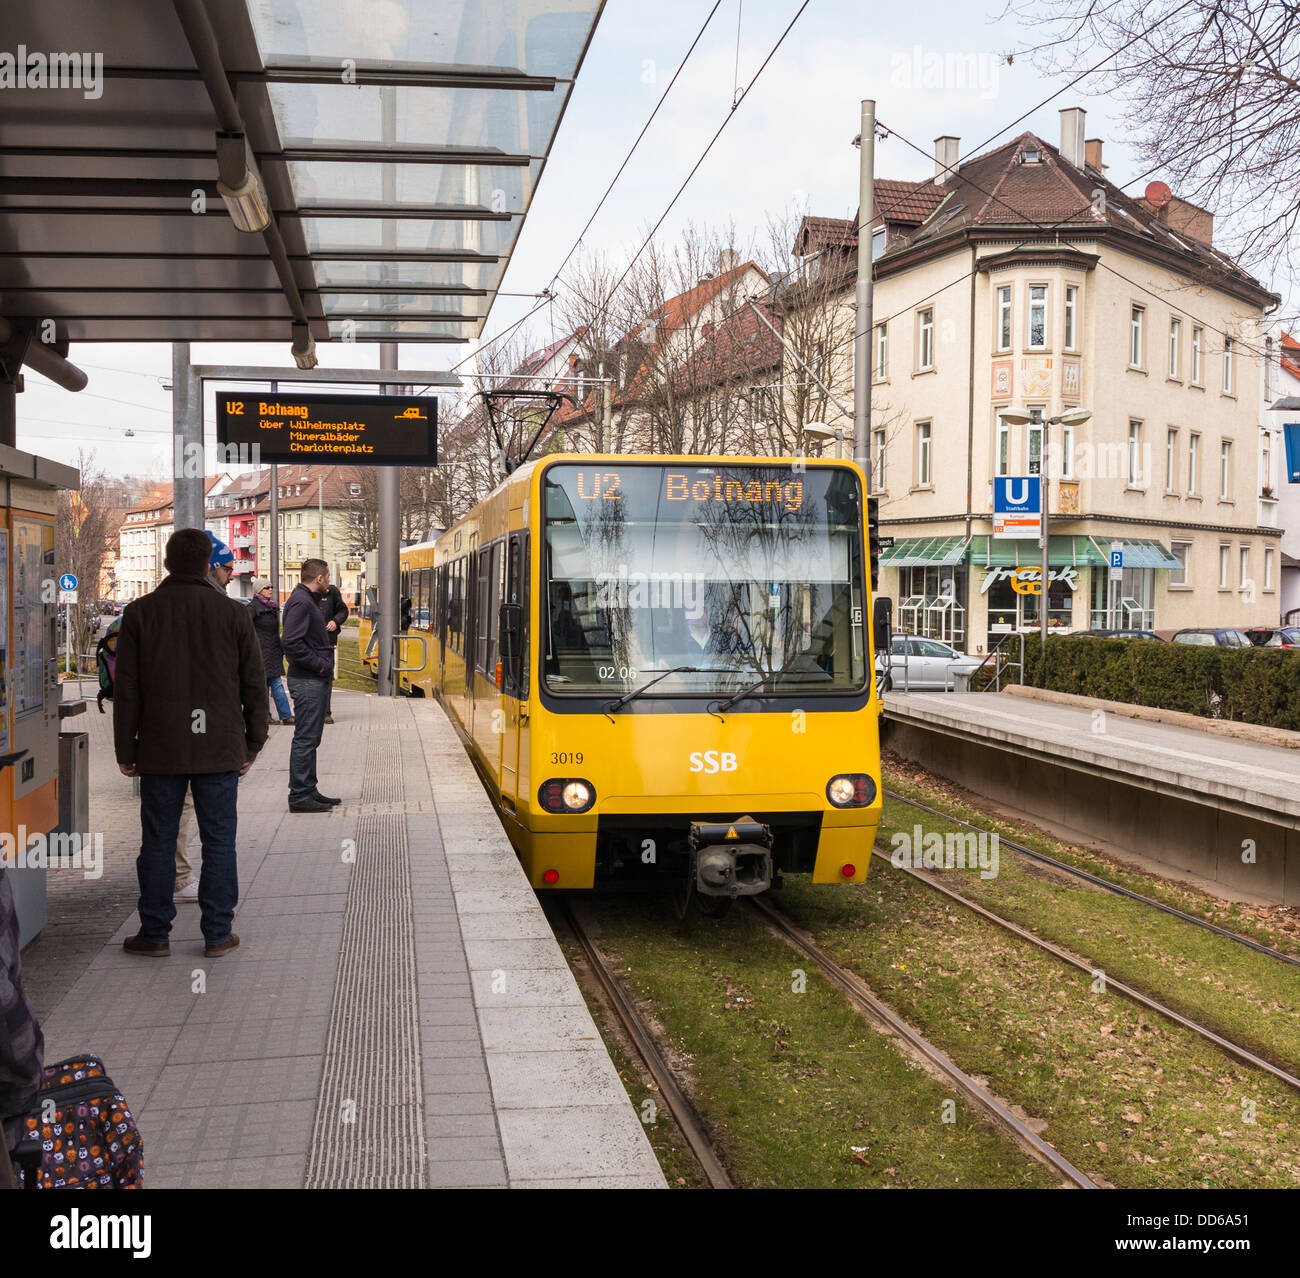 Train, Germany - in the city centre of Stuttgart Stock Photo